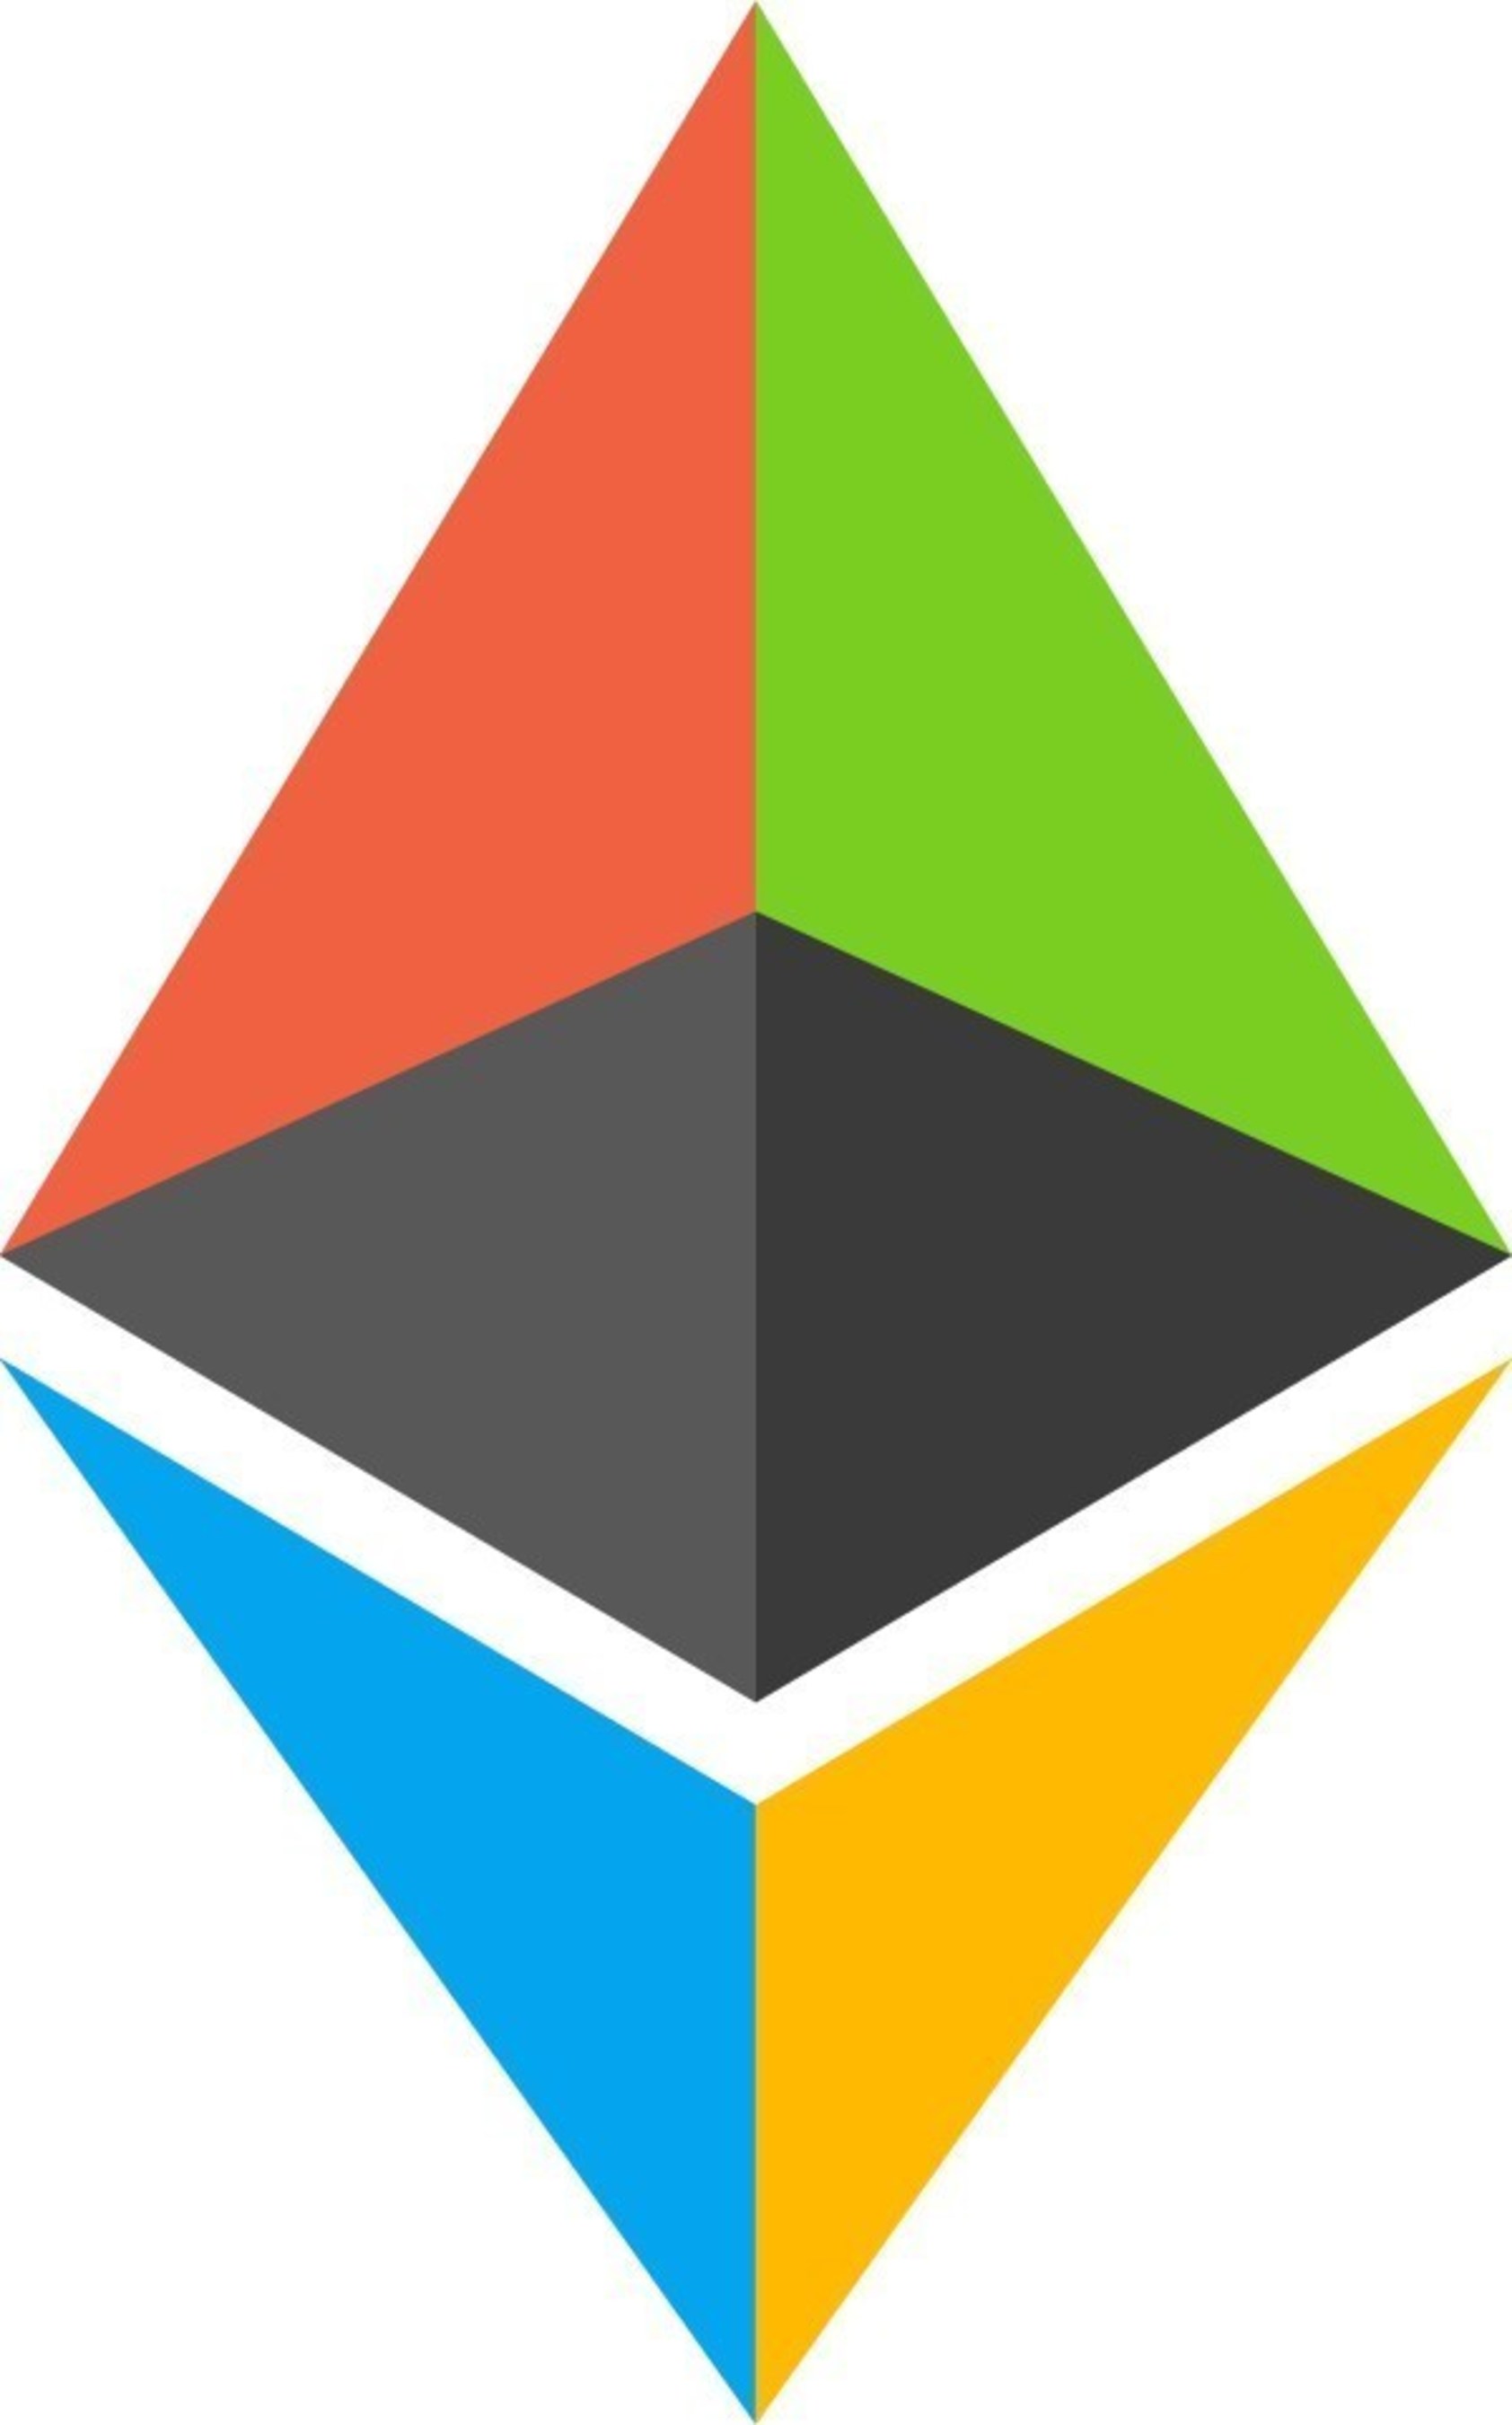 Ethereum Solidity now available in Microsoft Visual Studio